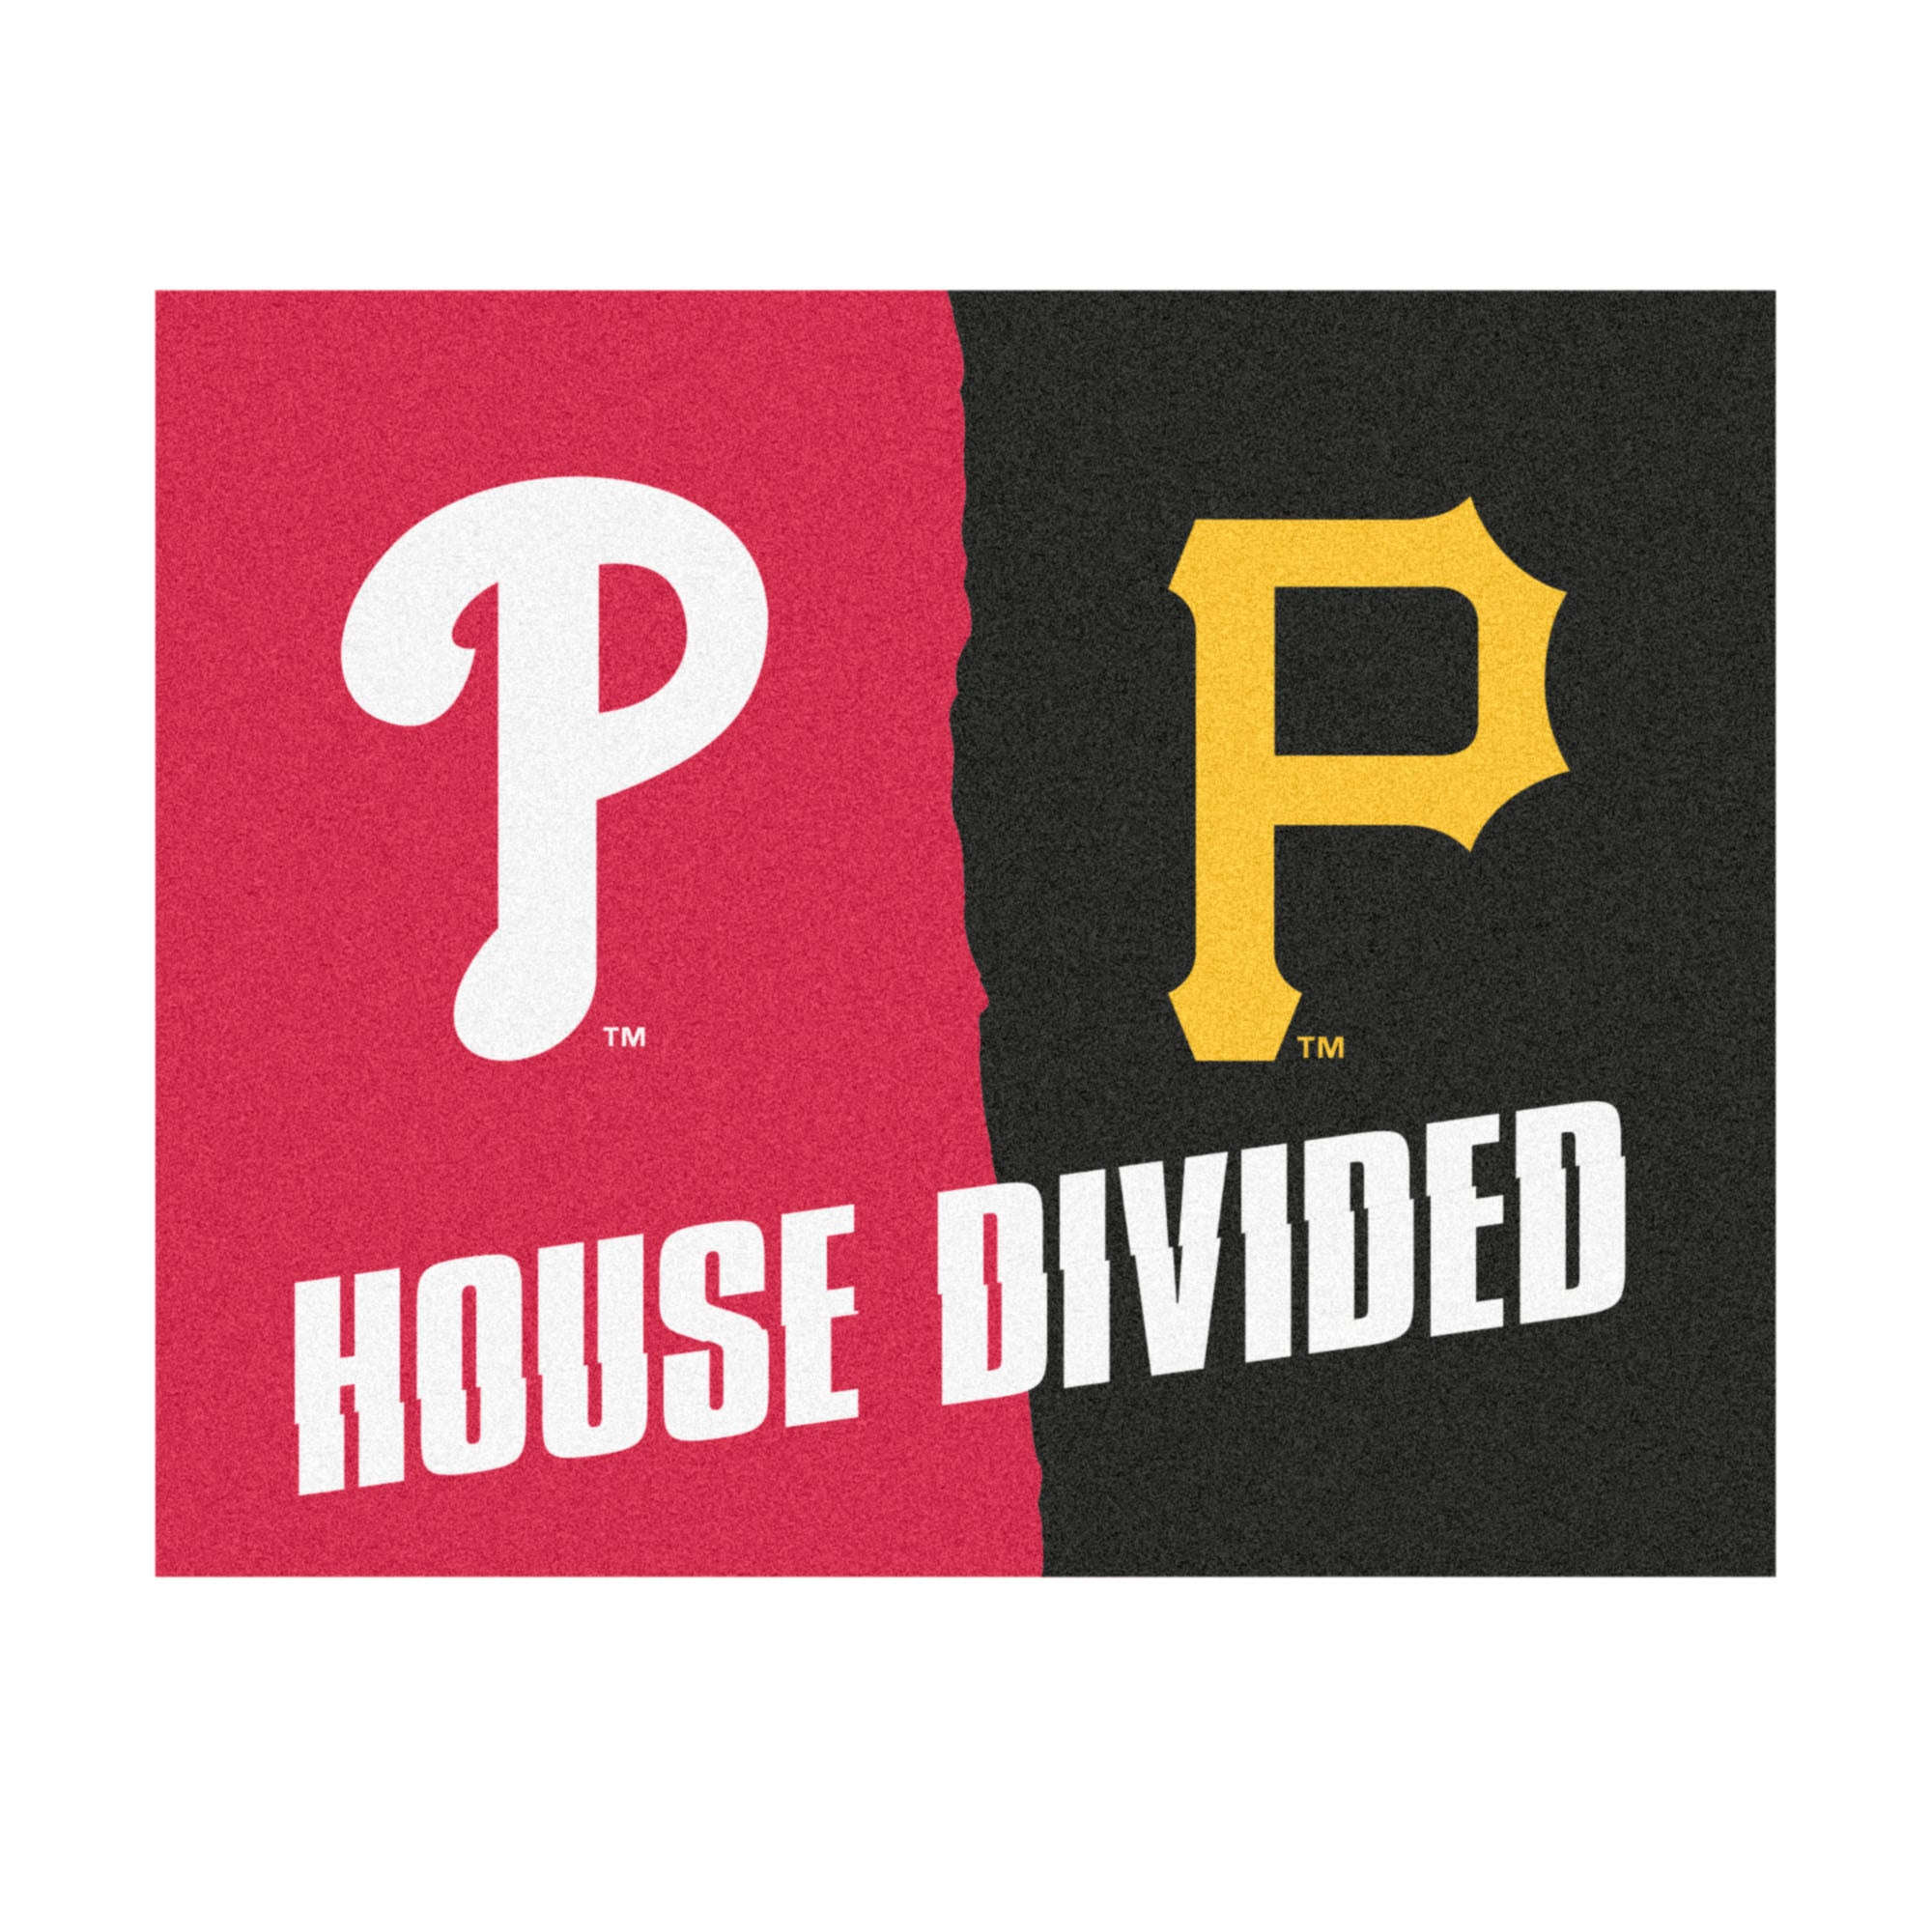 FANMATS, MLB House Divided - Pirates / Phillies House Divided Rug